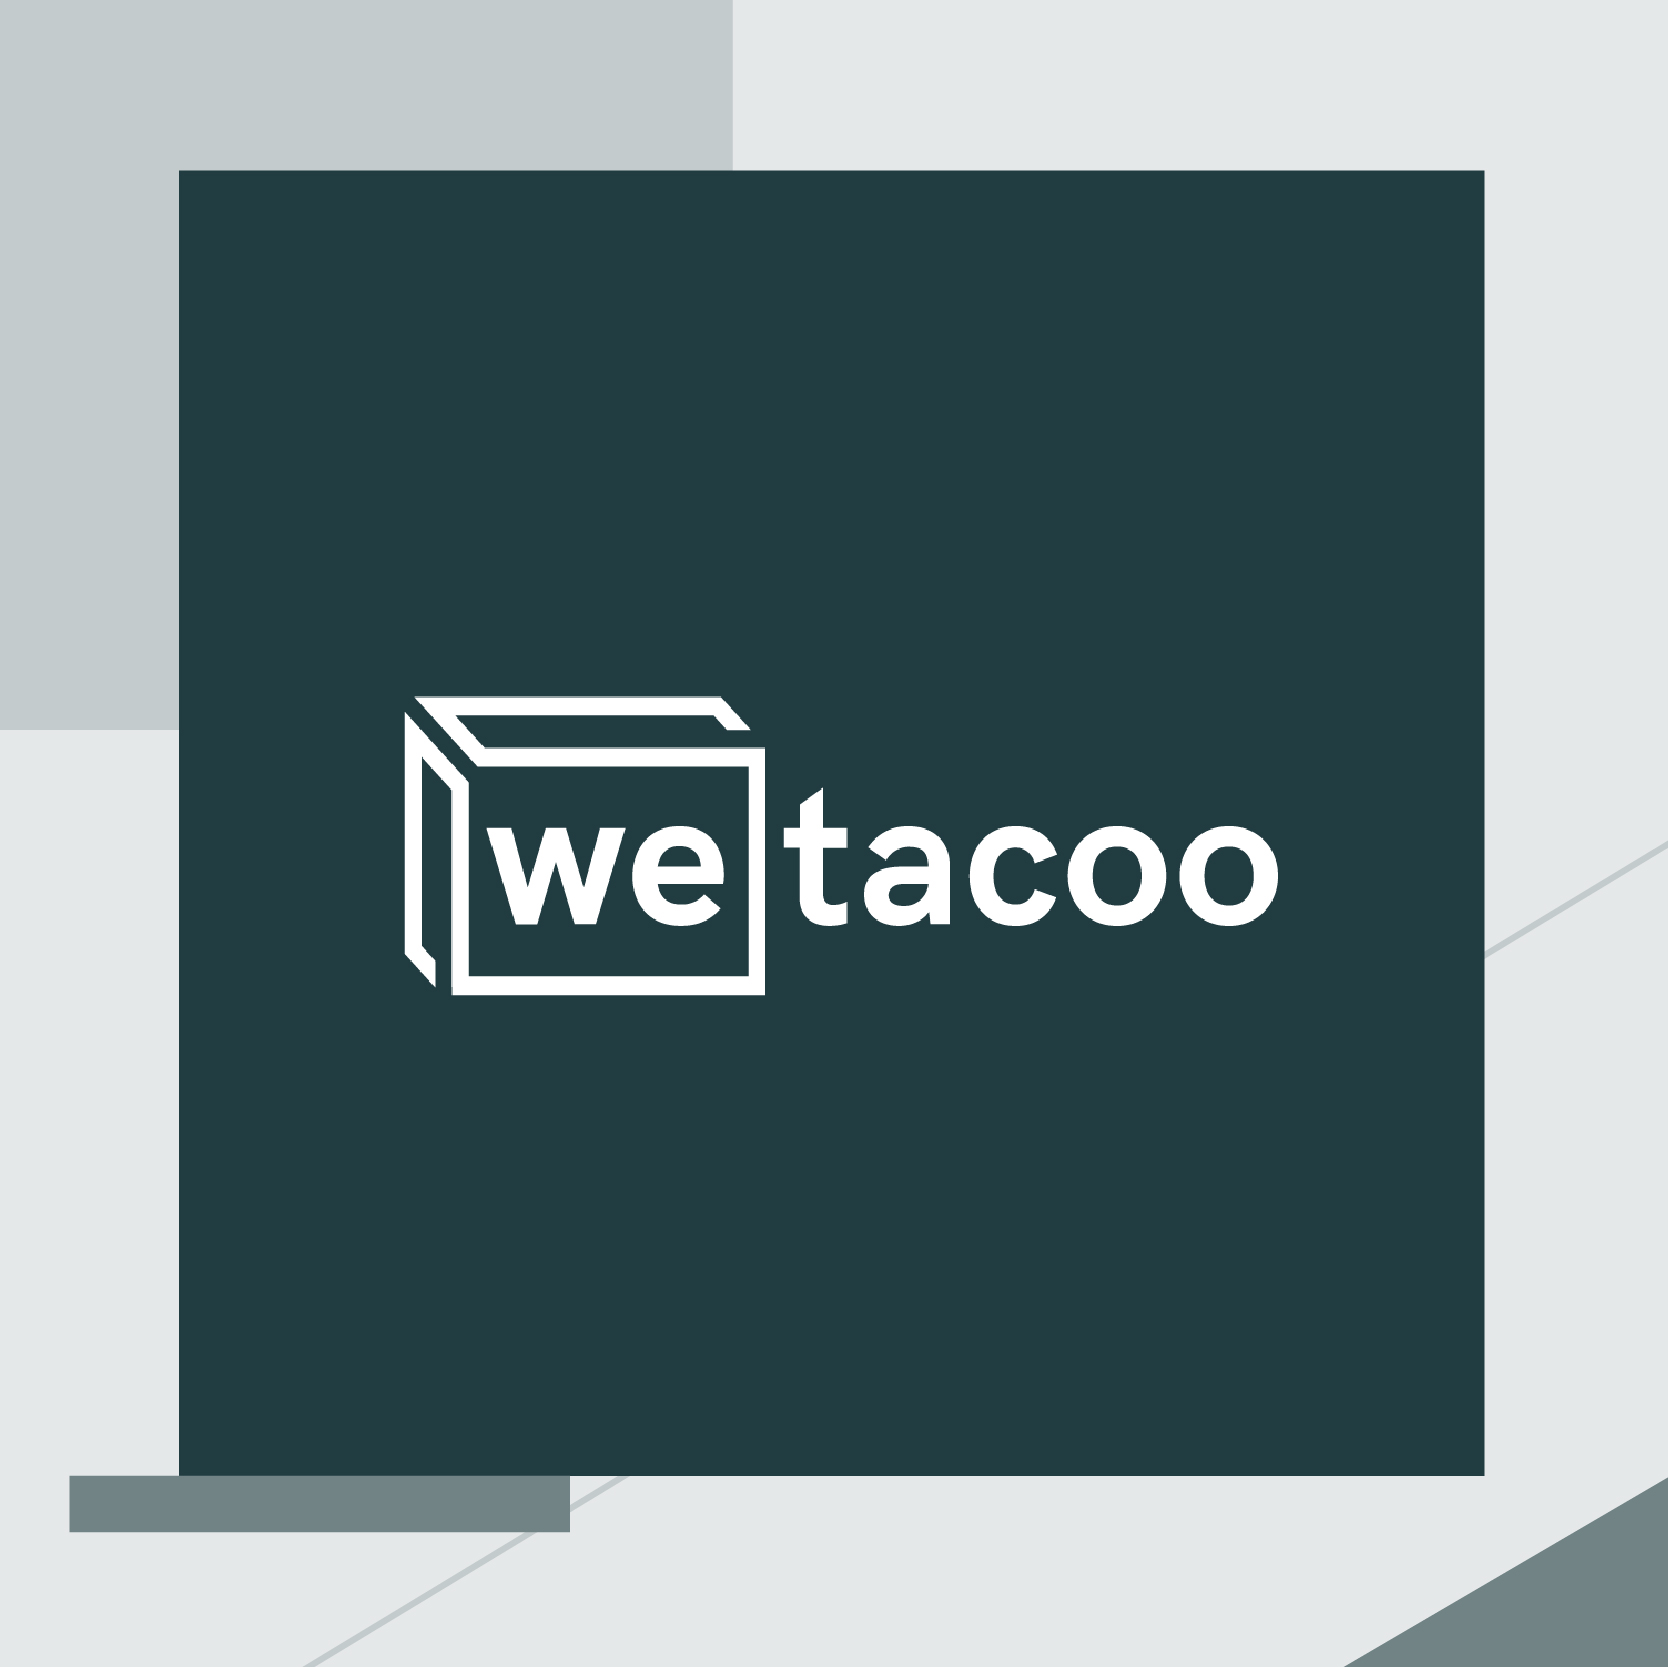 Wetacoo closes a € 750K seed investment round